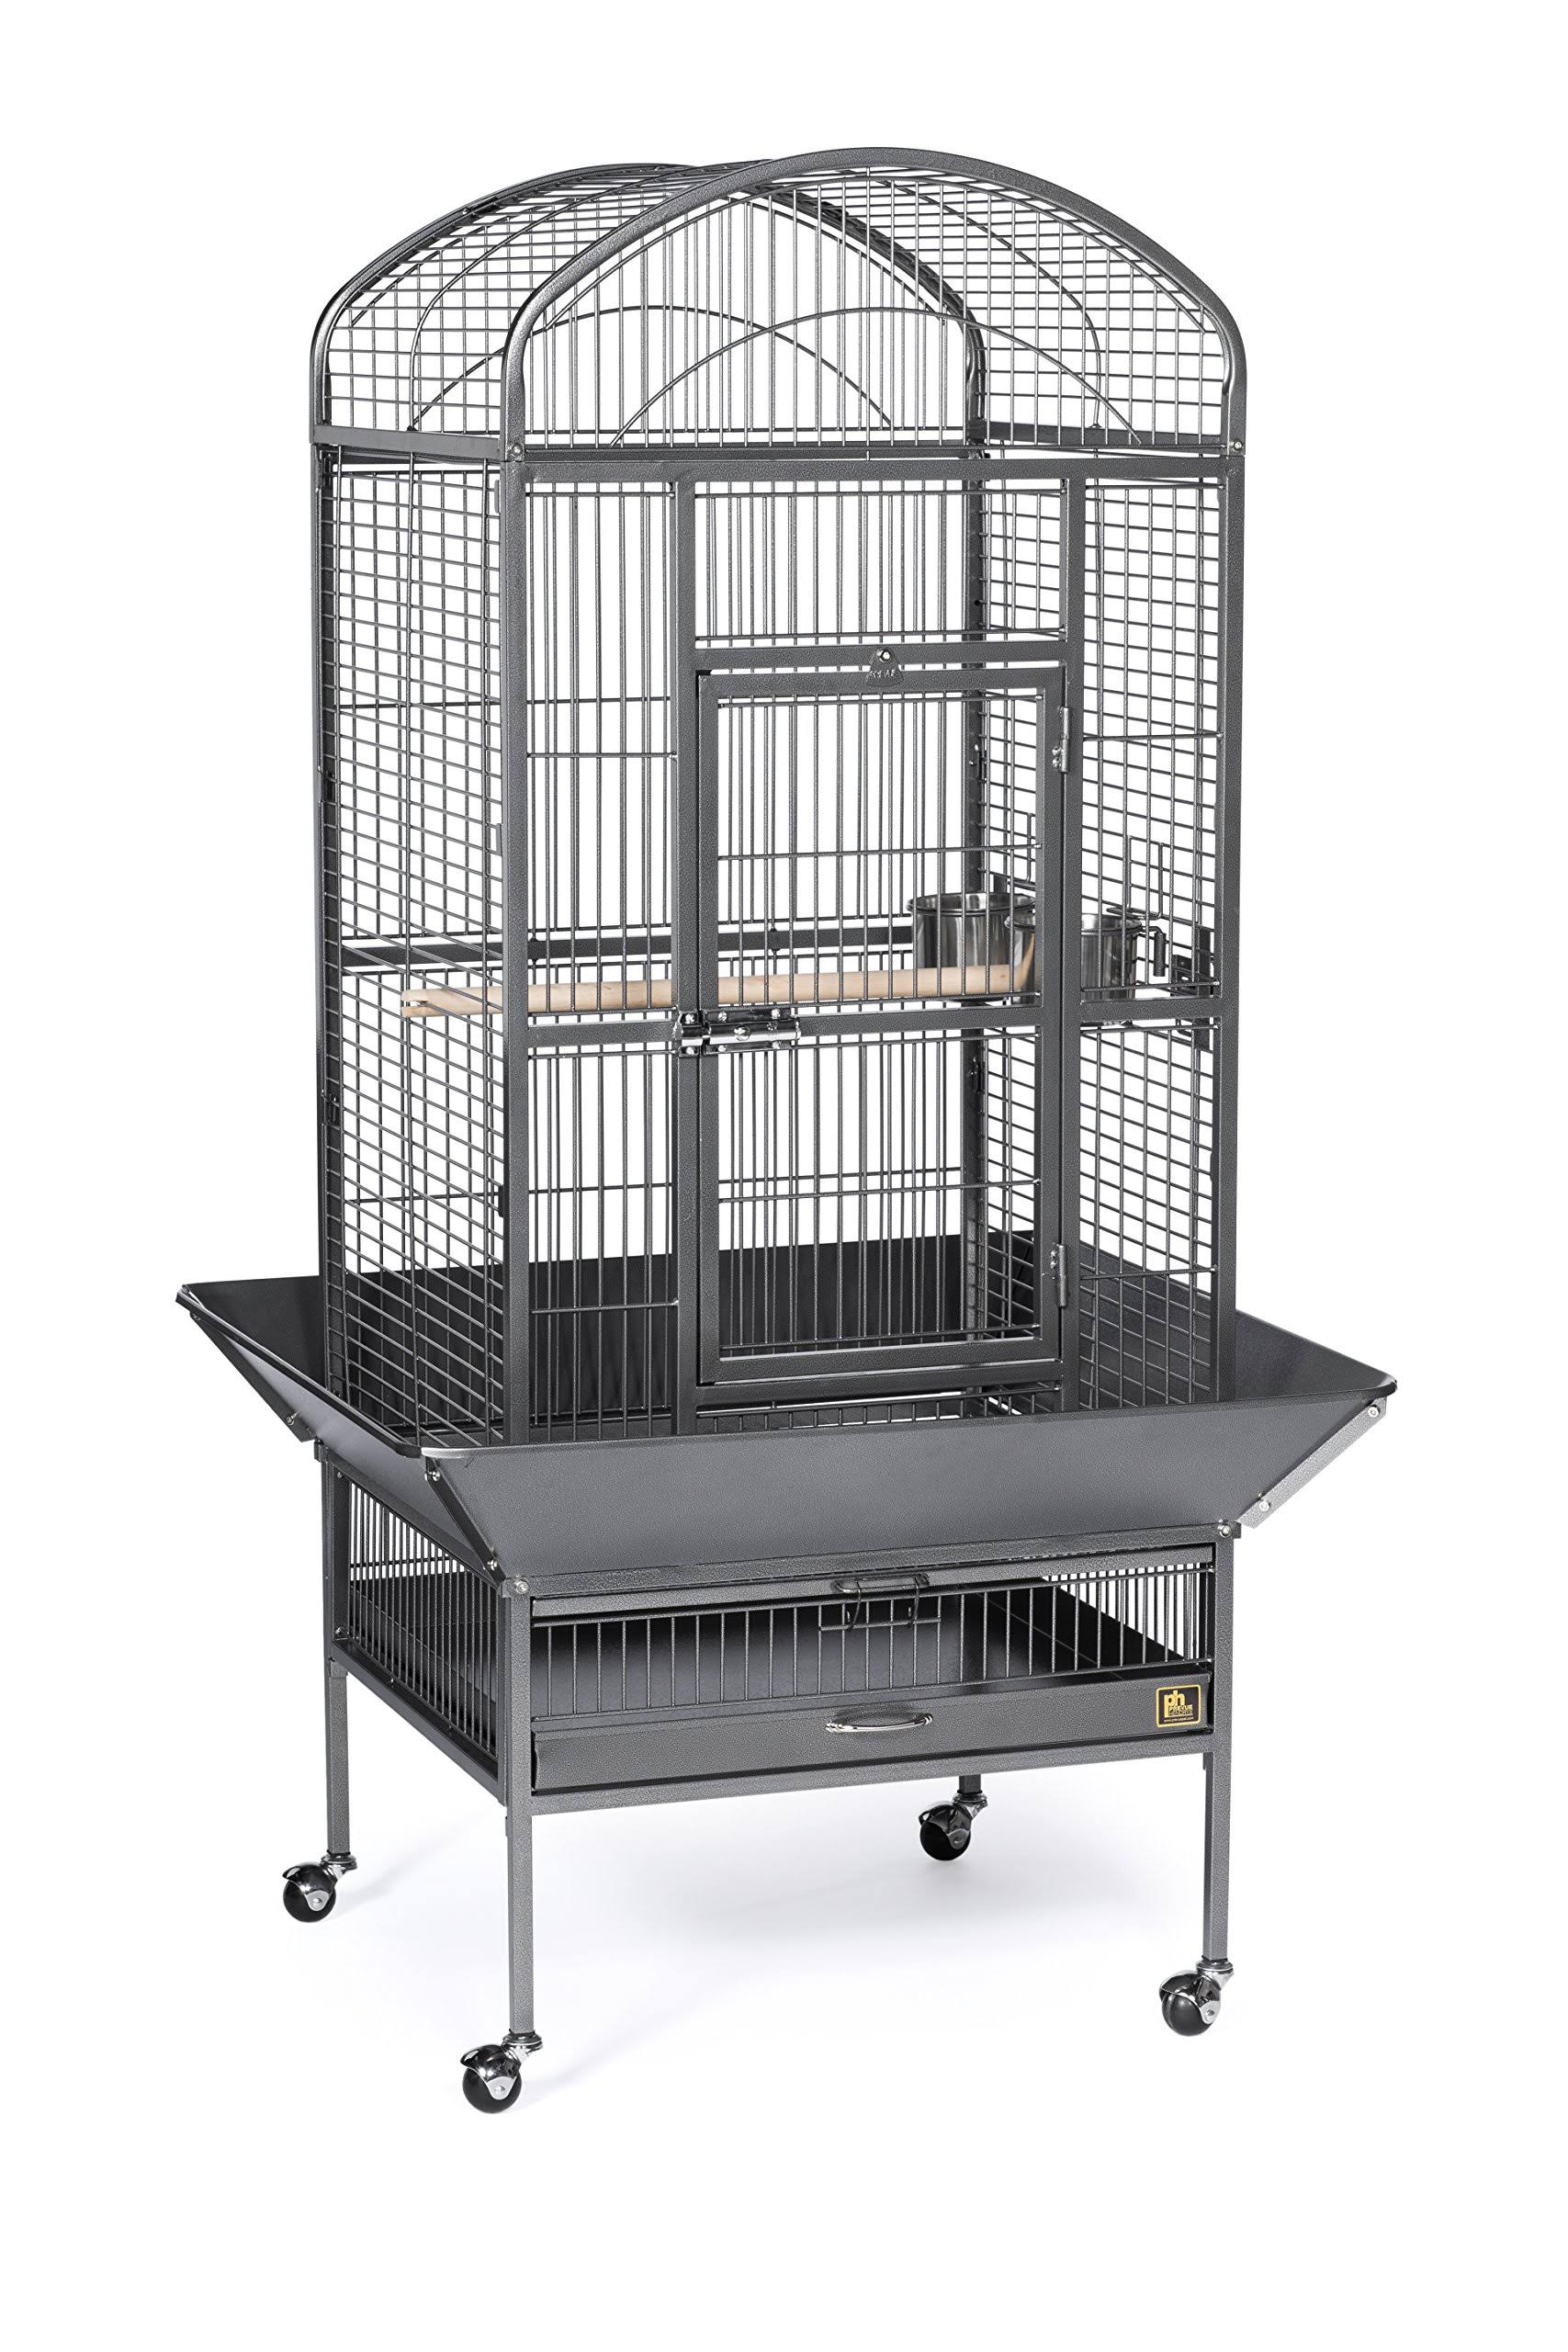 Prevue Pet Products 34521 Dometop Bird cage, Large, Black Hammertone